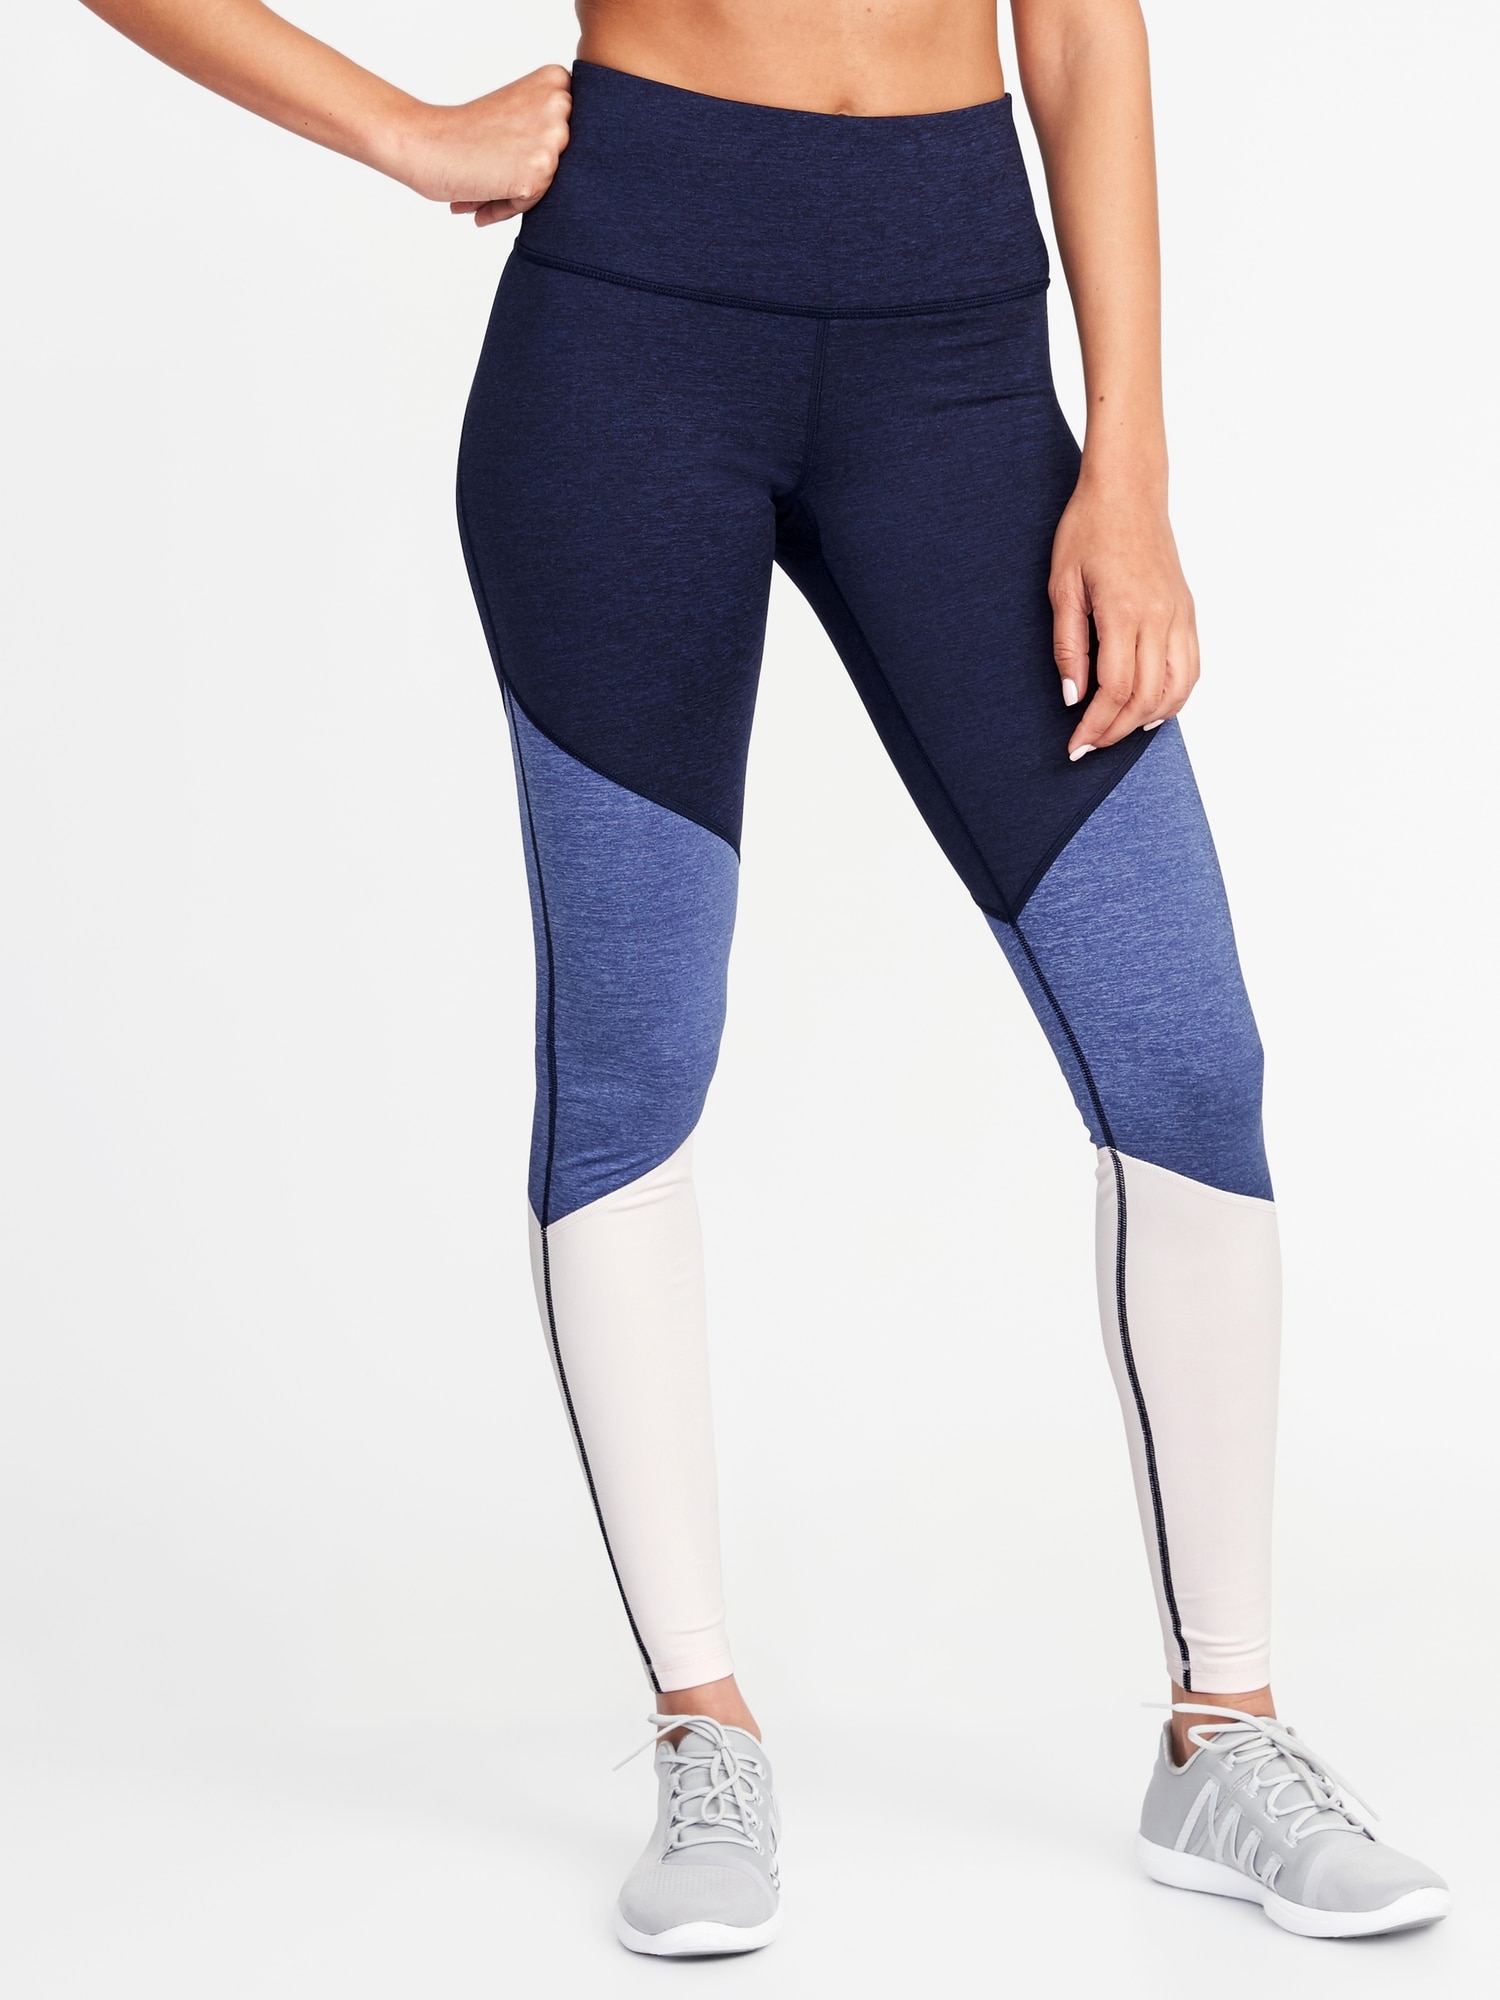 Stay Comfortable and Stylish with Old Navy High Compression Yoga Pants